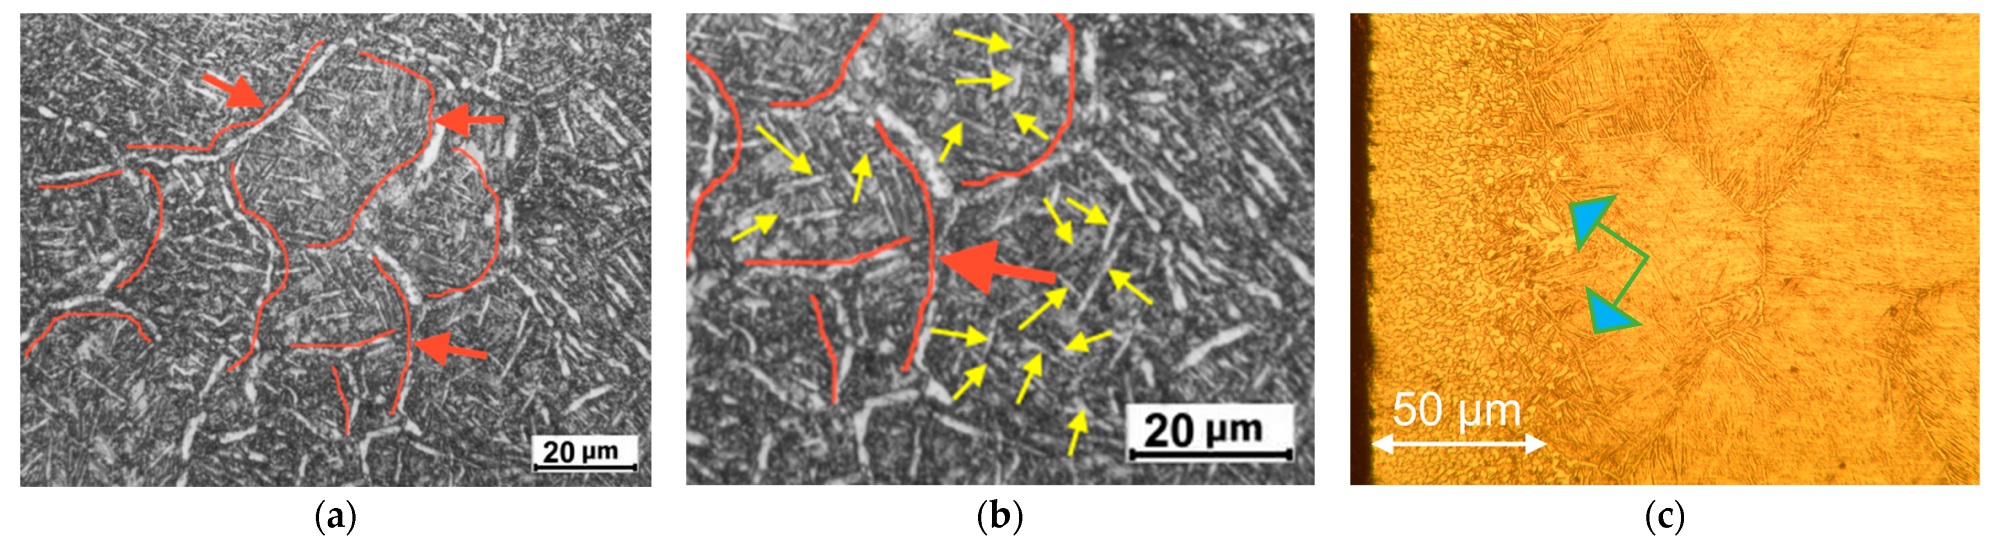 Microstructure of the BT22 alloy: (a) a phase on the boundaries of ß grains, in the as-supplied condition; (b) randomly oriented a phase inside ß grains, in the as-supplied condition; (c) after nitriding. The arrows show the boundary of the nitrided layer.